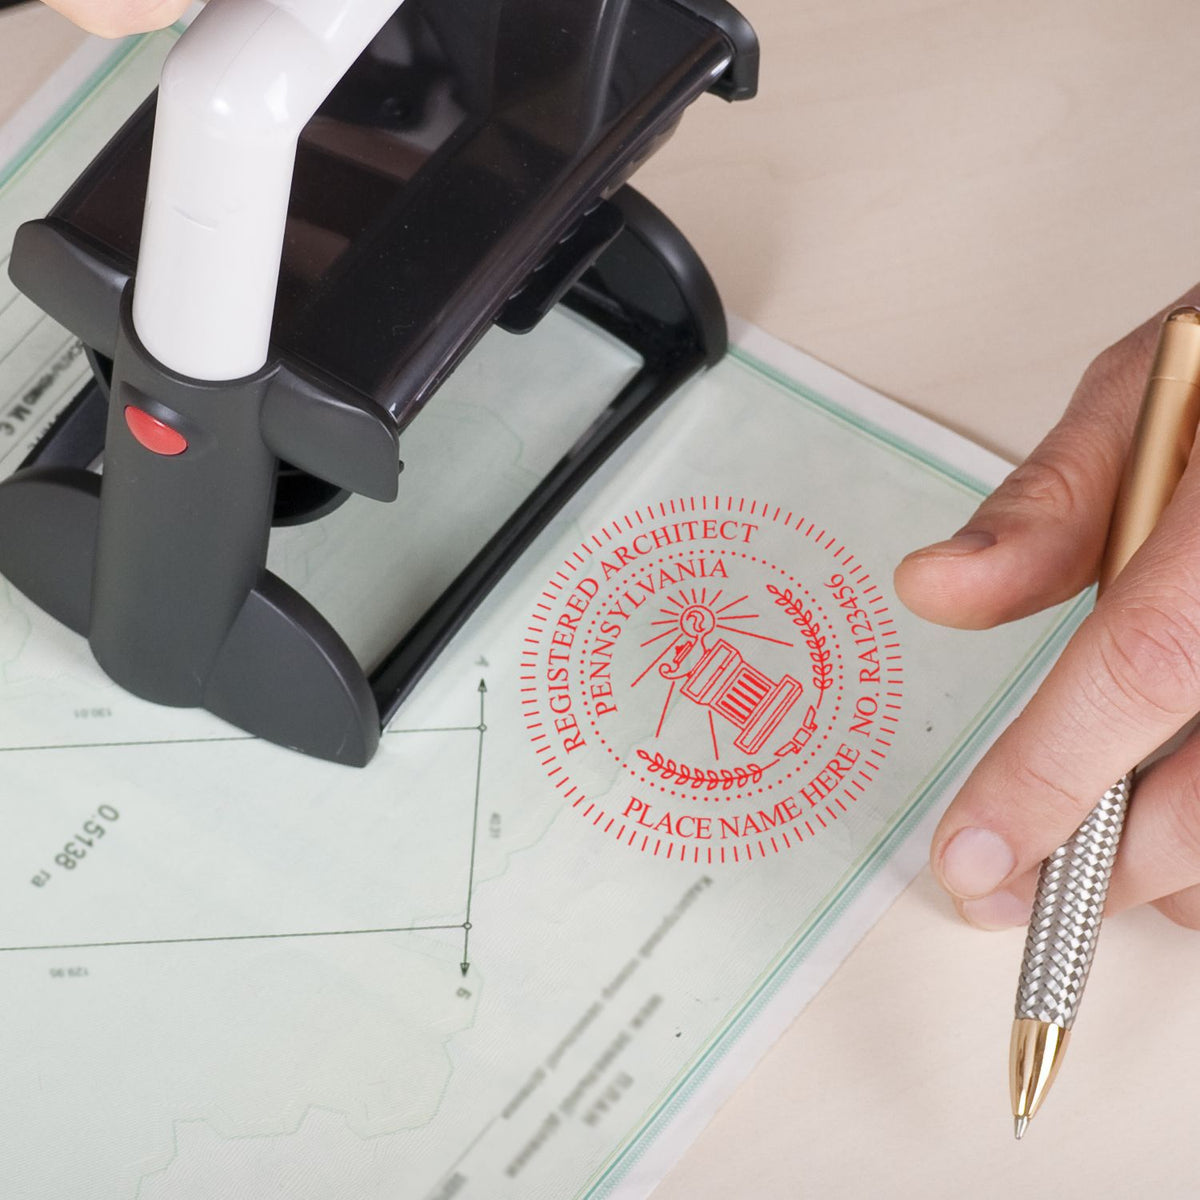 The Slim Pre-Inked Pennsylvania Architect Seal Stamp stamp impression comes to life with a crisp, detailed photo on paper - showcasing true professional quality.